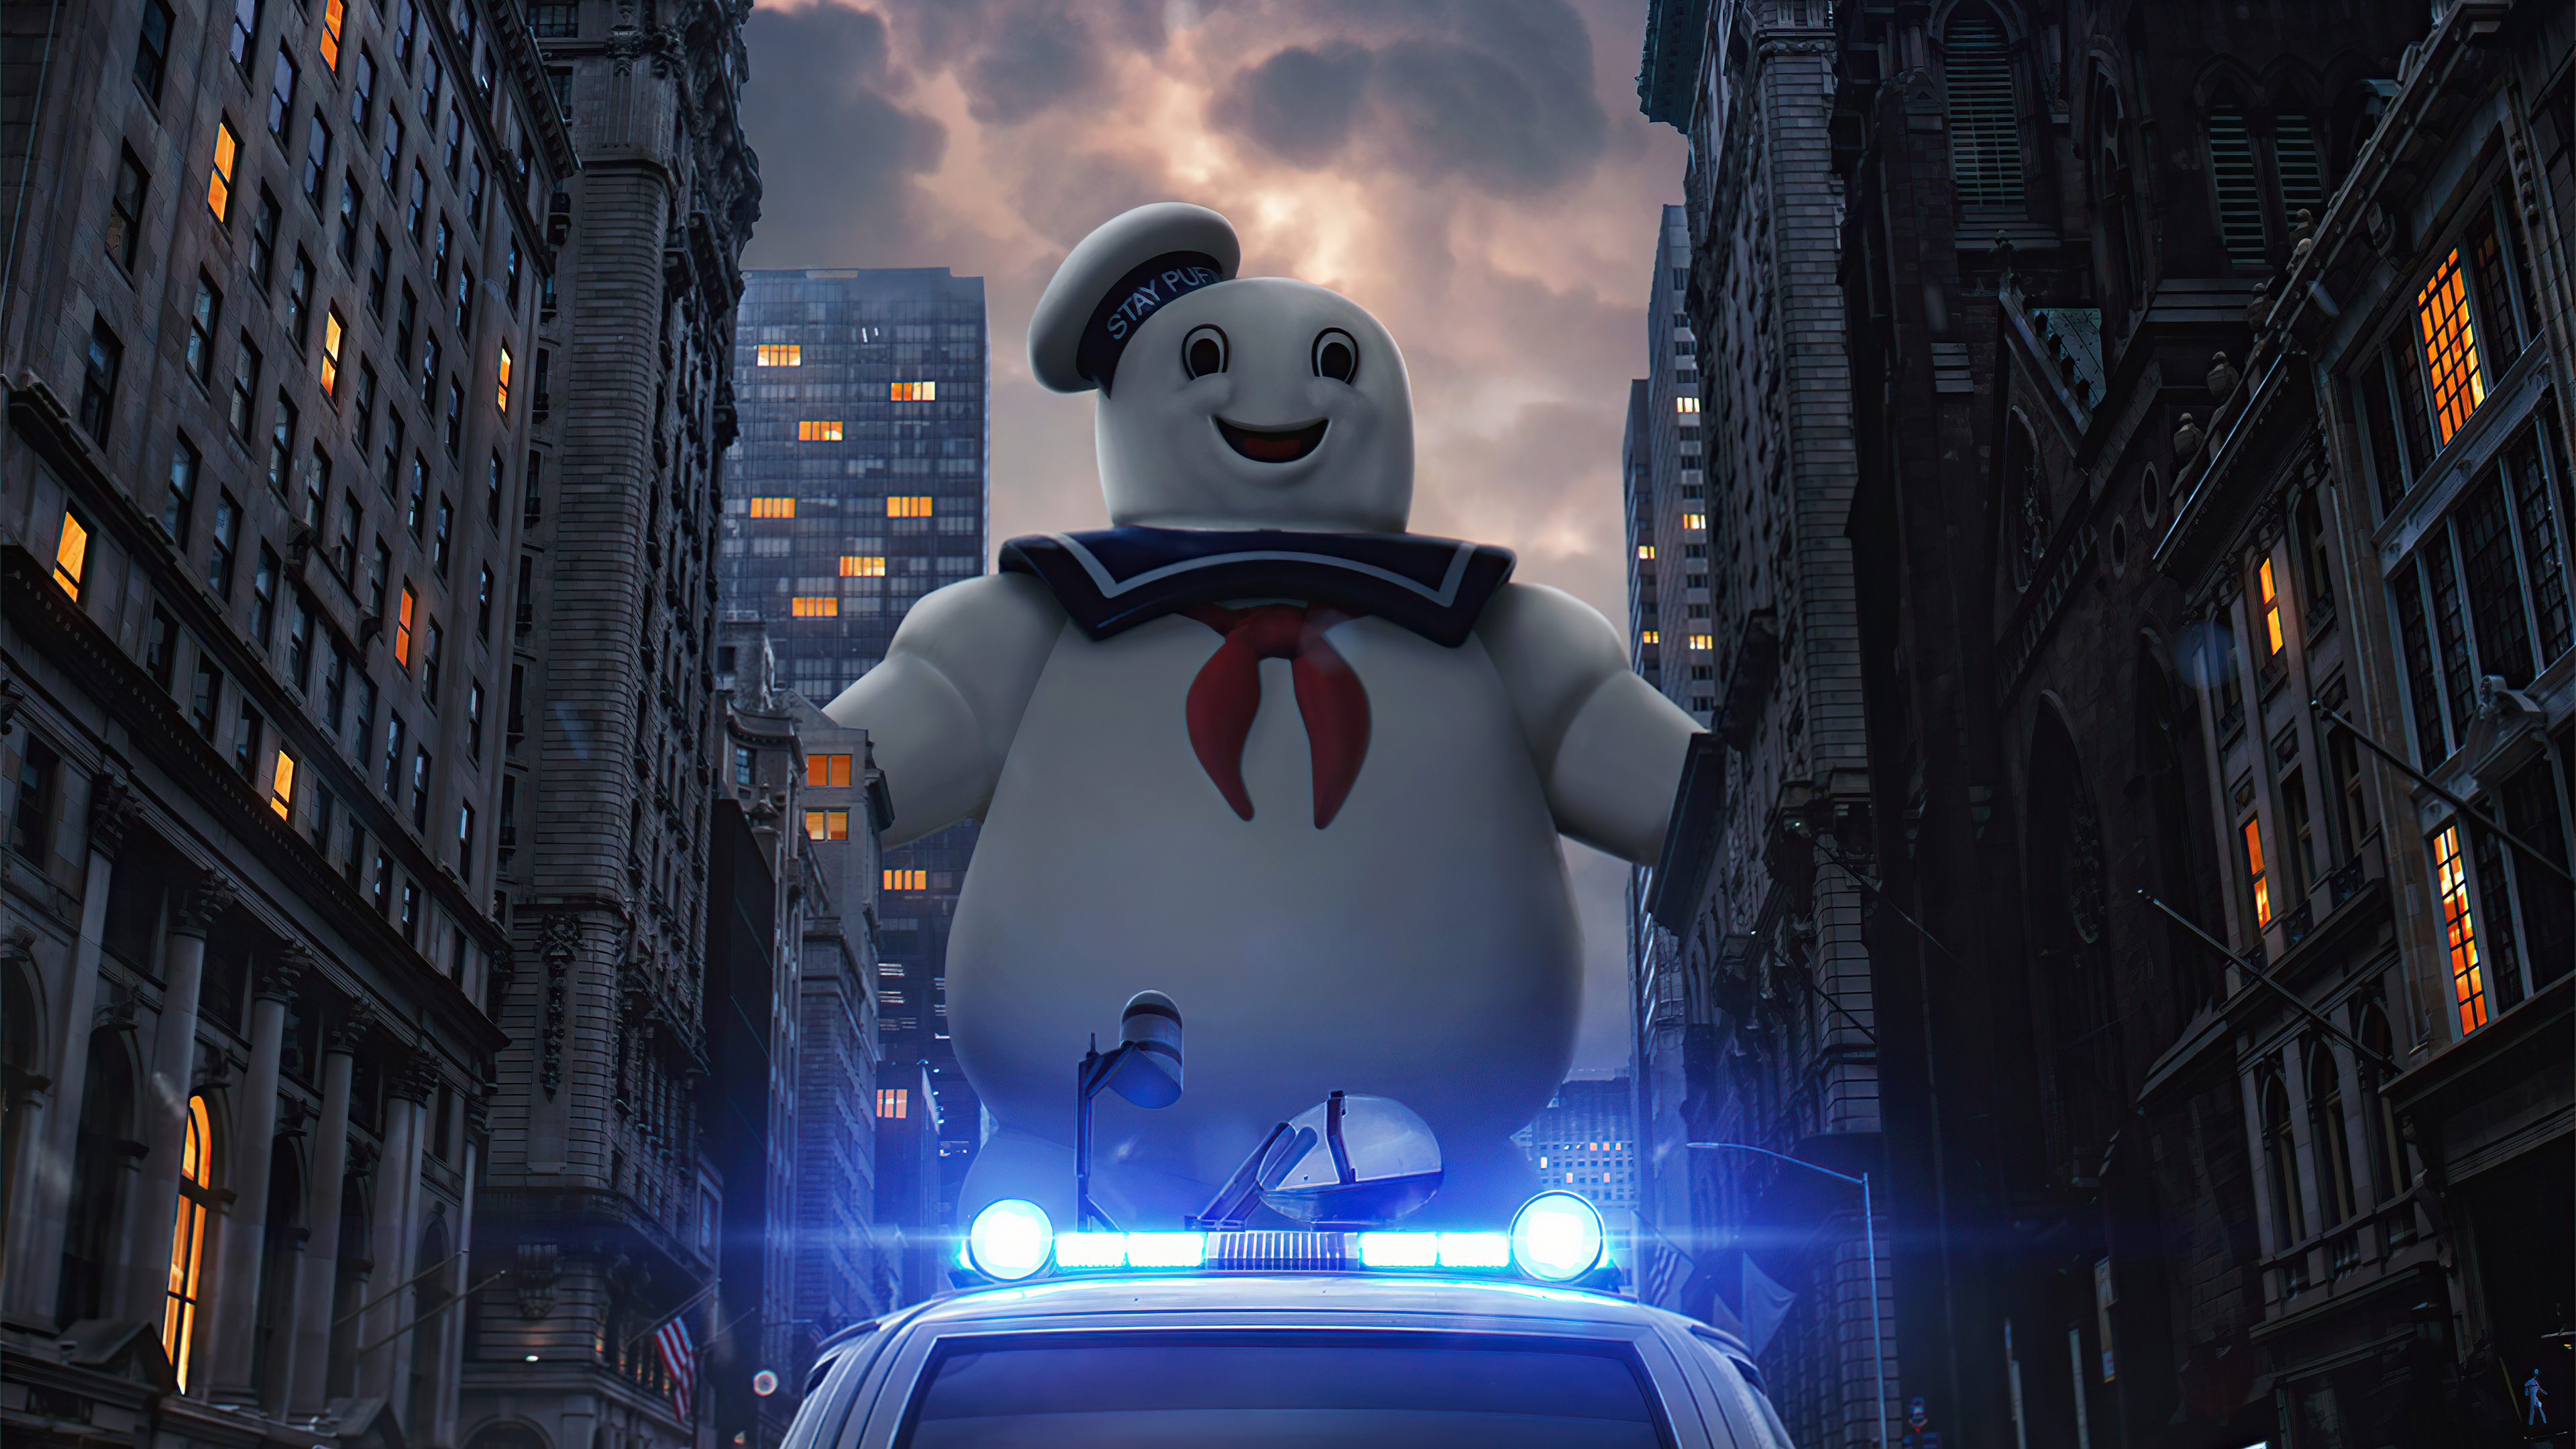 Ghostbusters fanmade poster, Movies 4k wallpapers, 3840x2160 4K Desktop